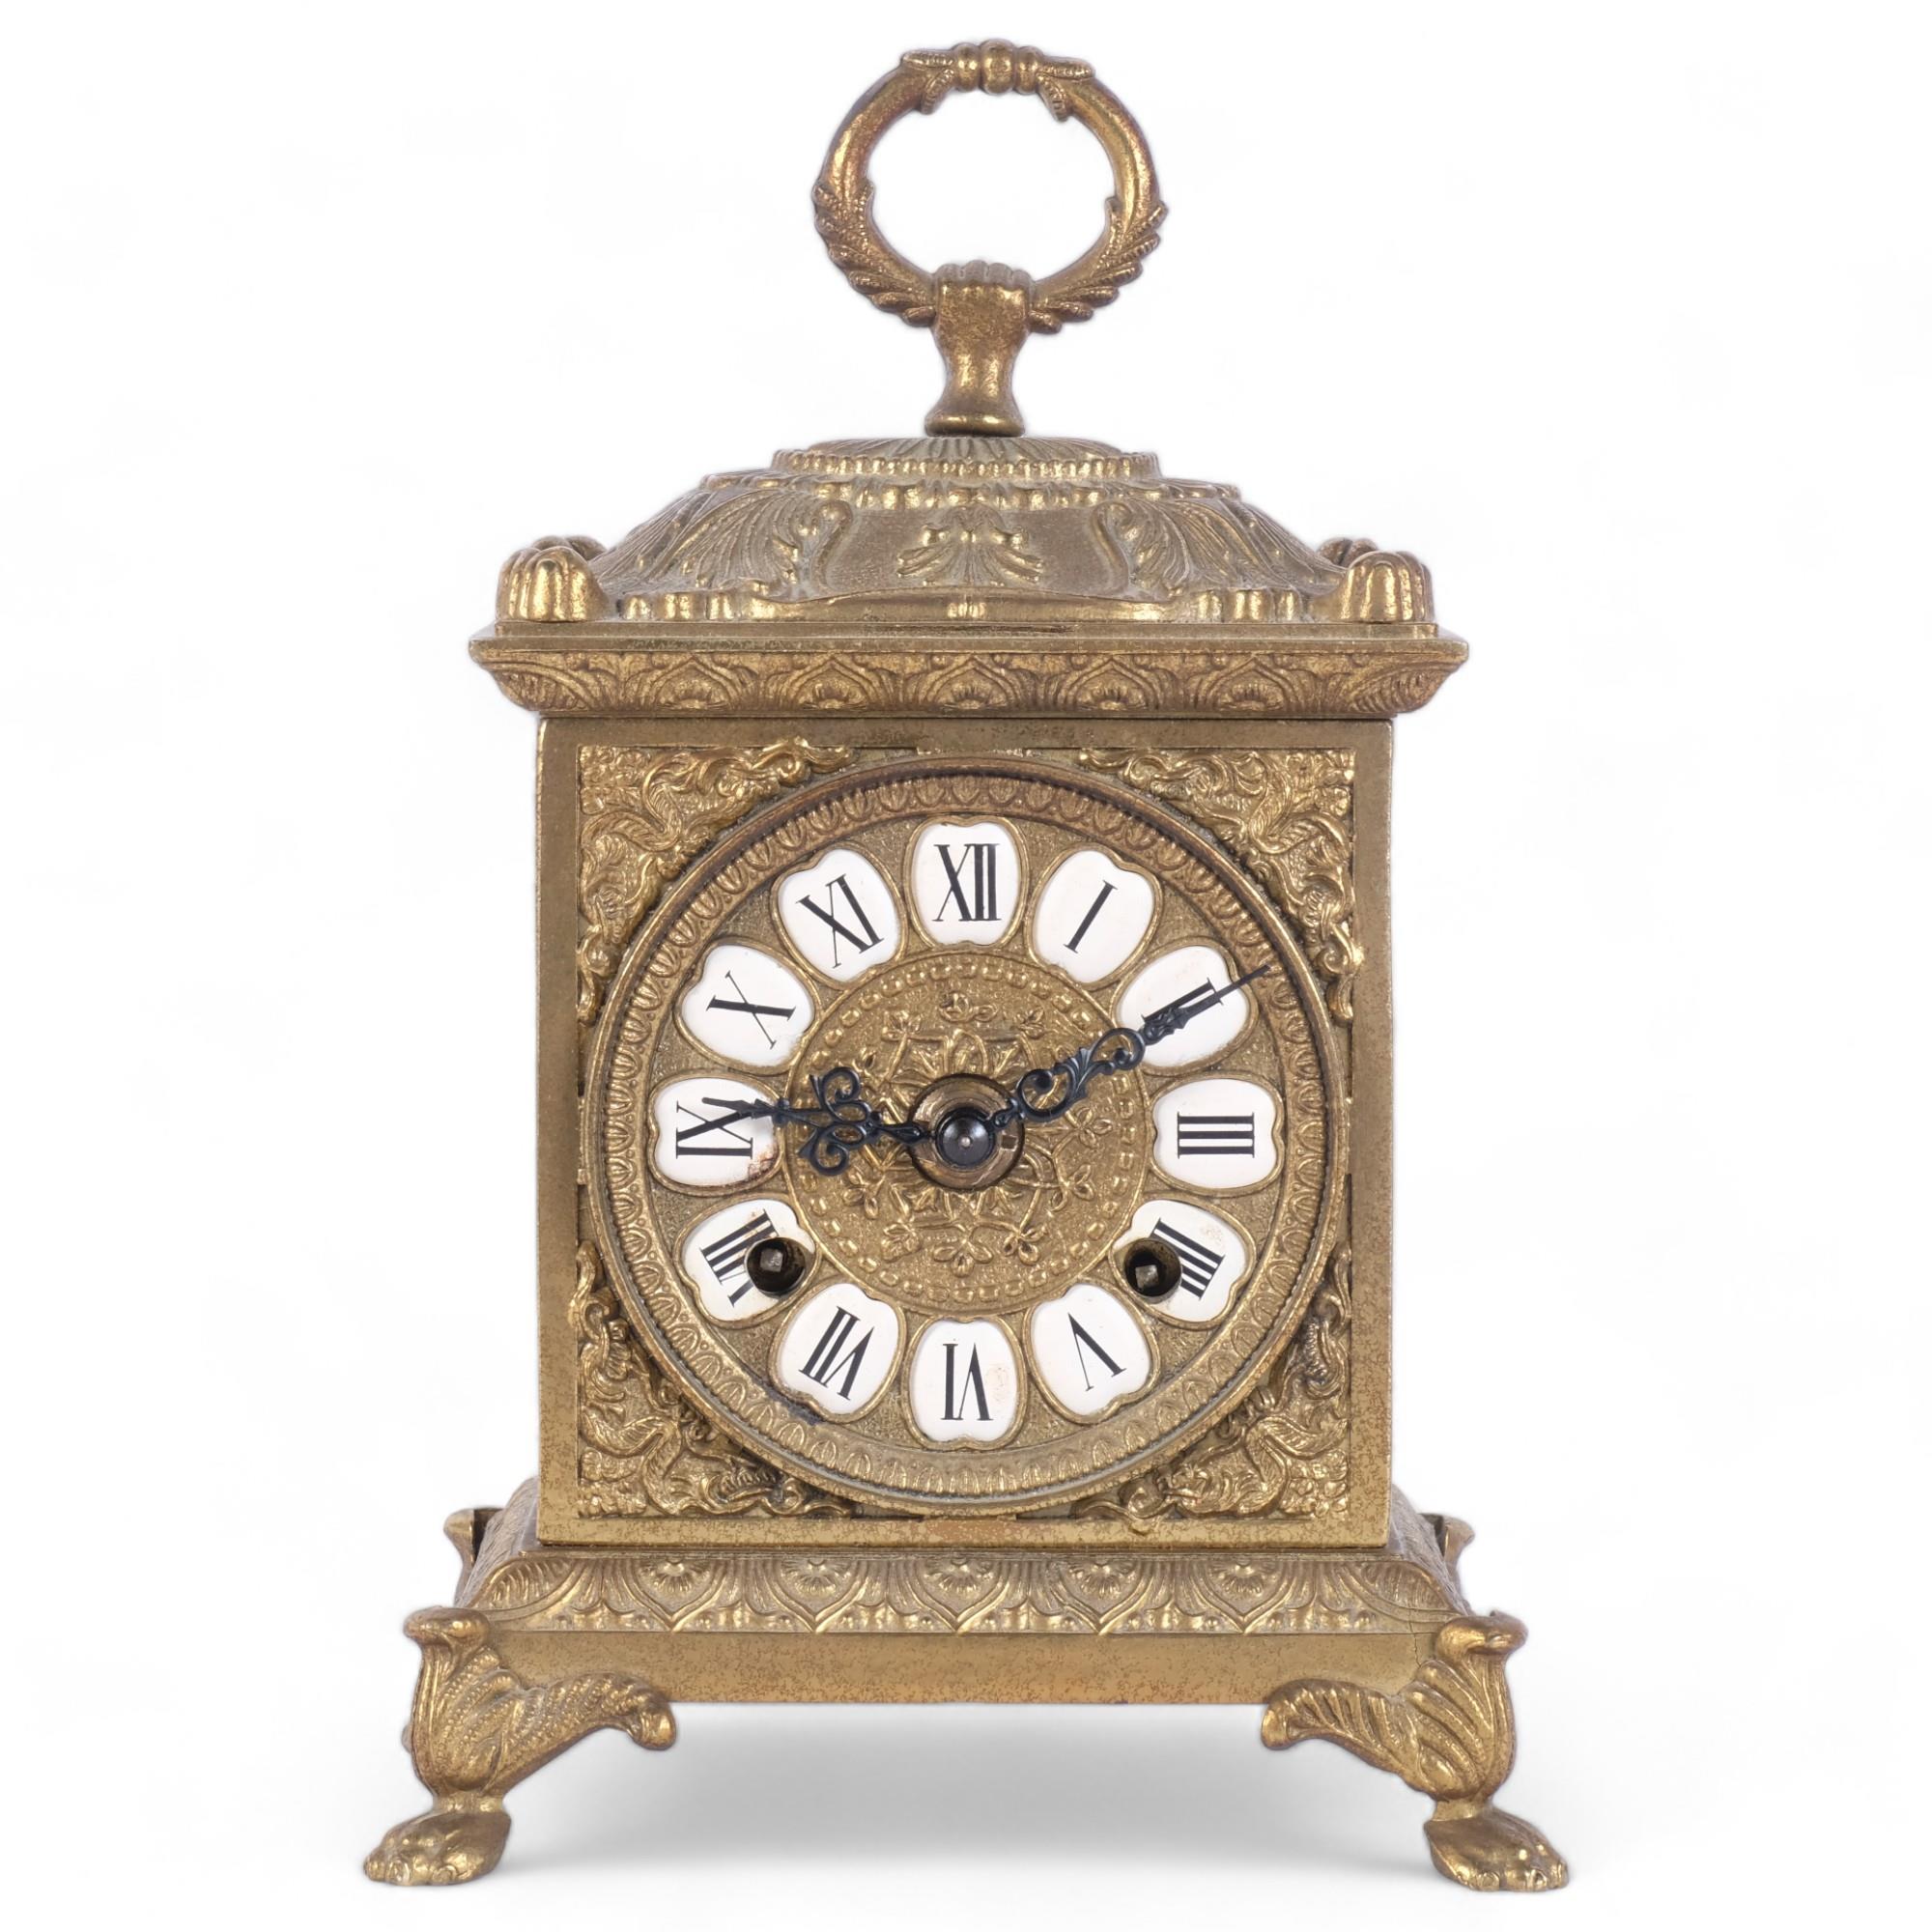 A small gilt-metal mantel clock, 8-day striking movement, enamelled batons and Roman numerals,